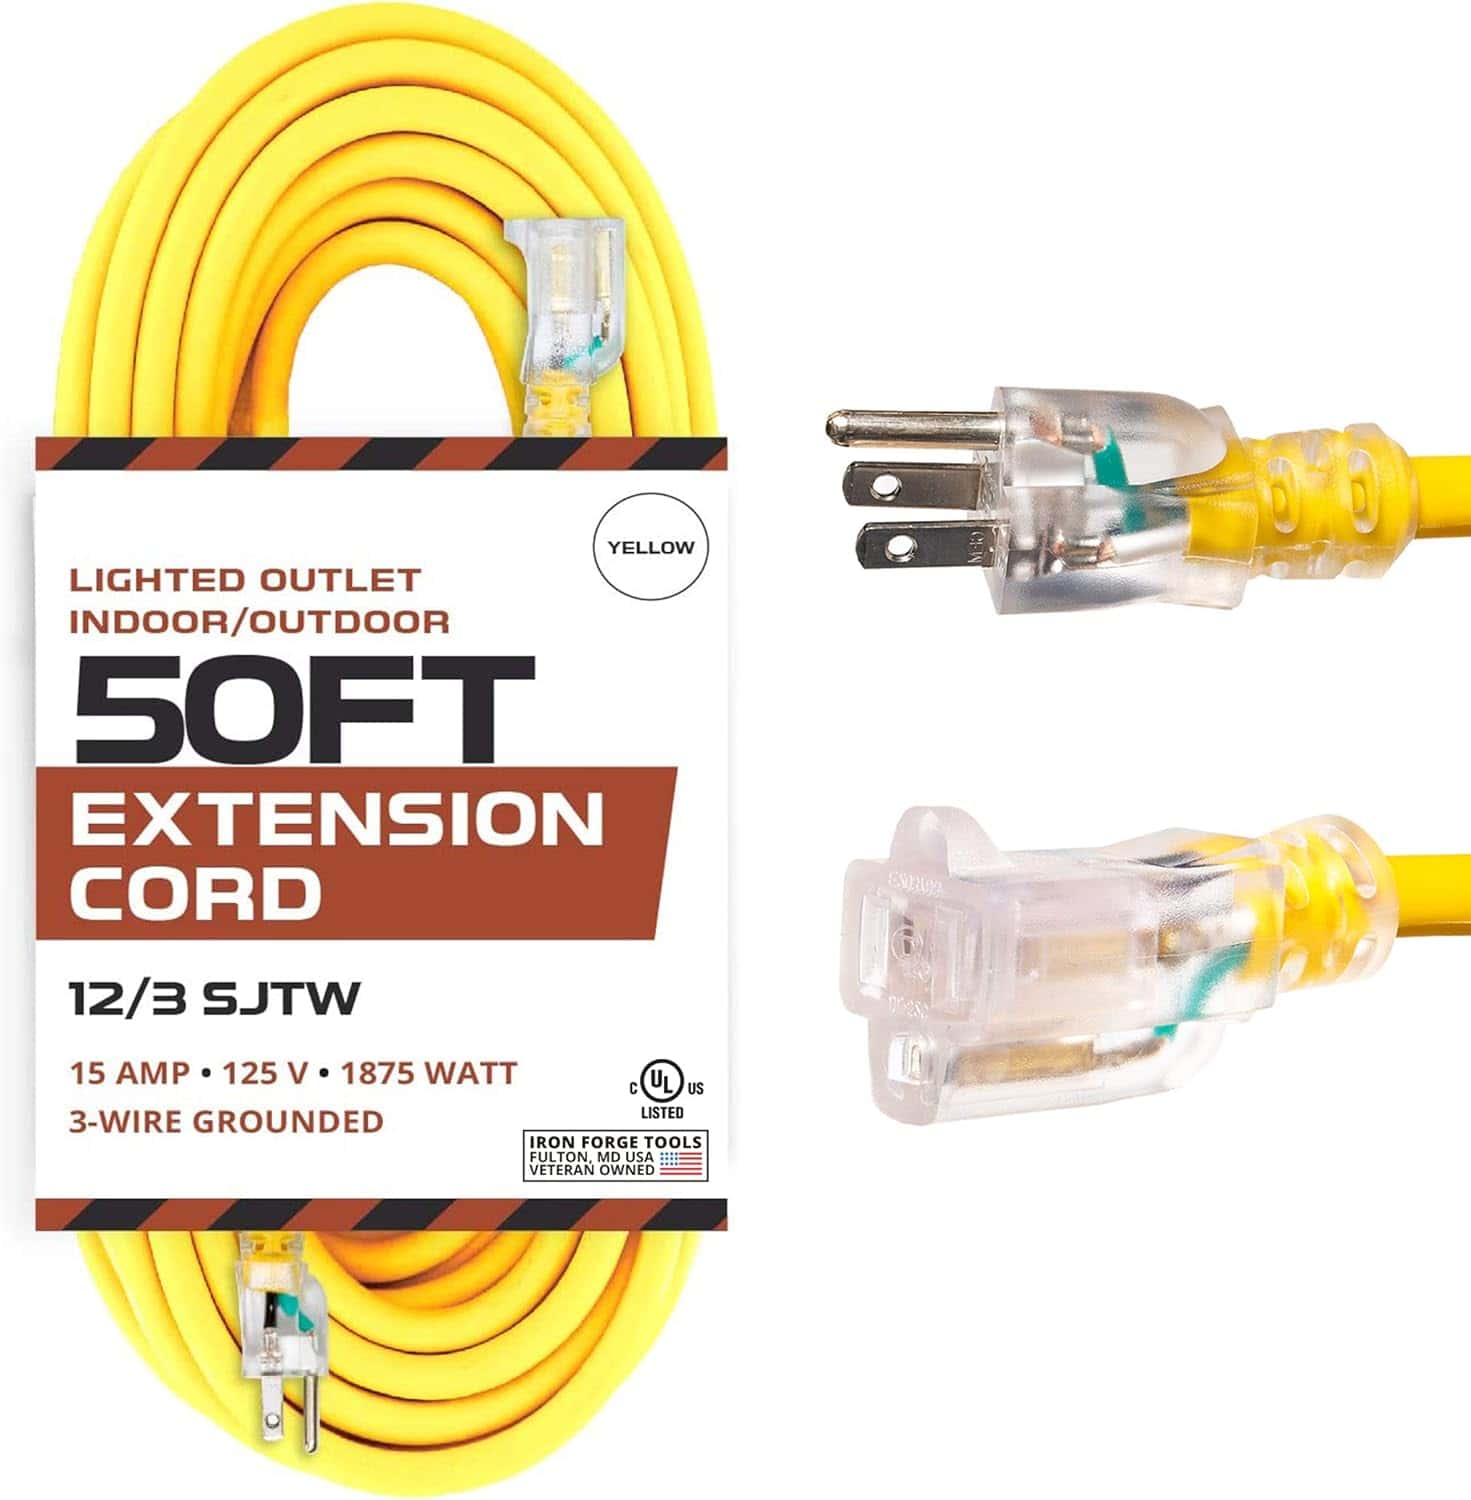 Iron Forge Outdoor Lighted Extension Cord 50 Ft – 12 3 SJTW Heavy Duty 15 AMP Yellow Extension Cable with 3 Prong Grounded Safety Plug, 12 Gauge Extension Cord for Garden, Major Electric Appliances 1